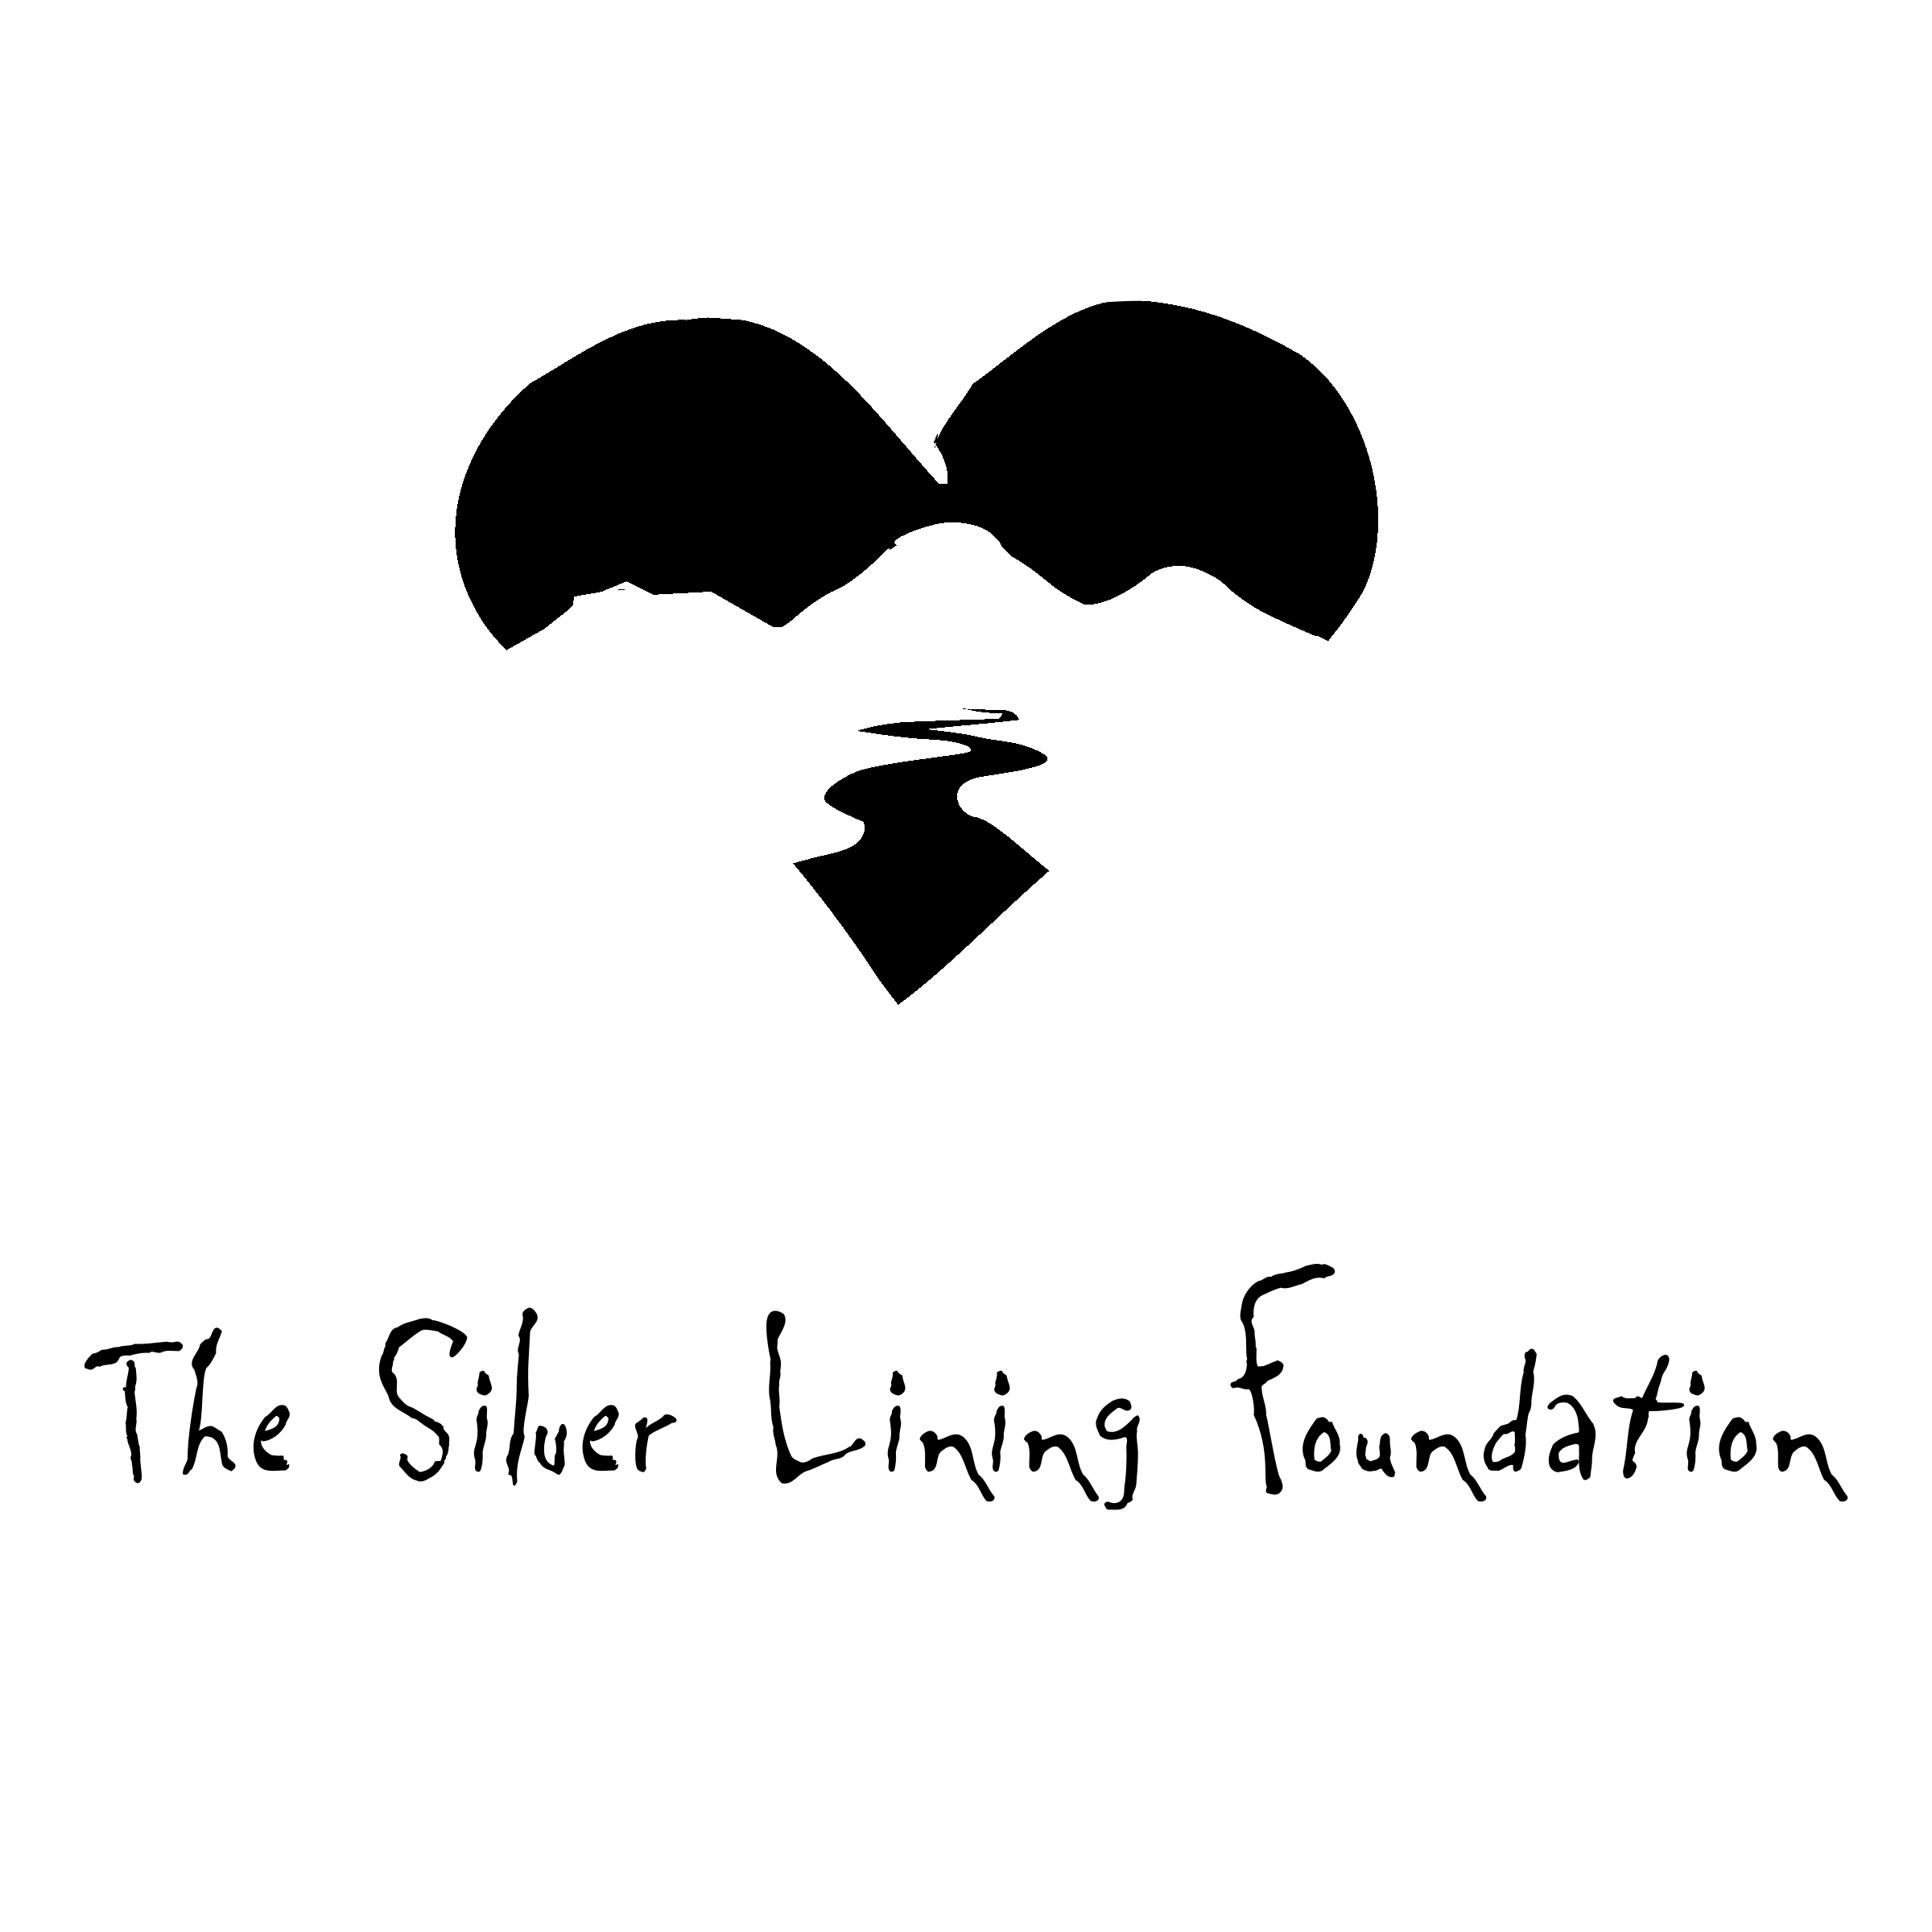 Lining Logo - The Silver Lining Foundation Logo PNG Transparent & SVG Vector